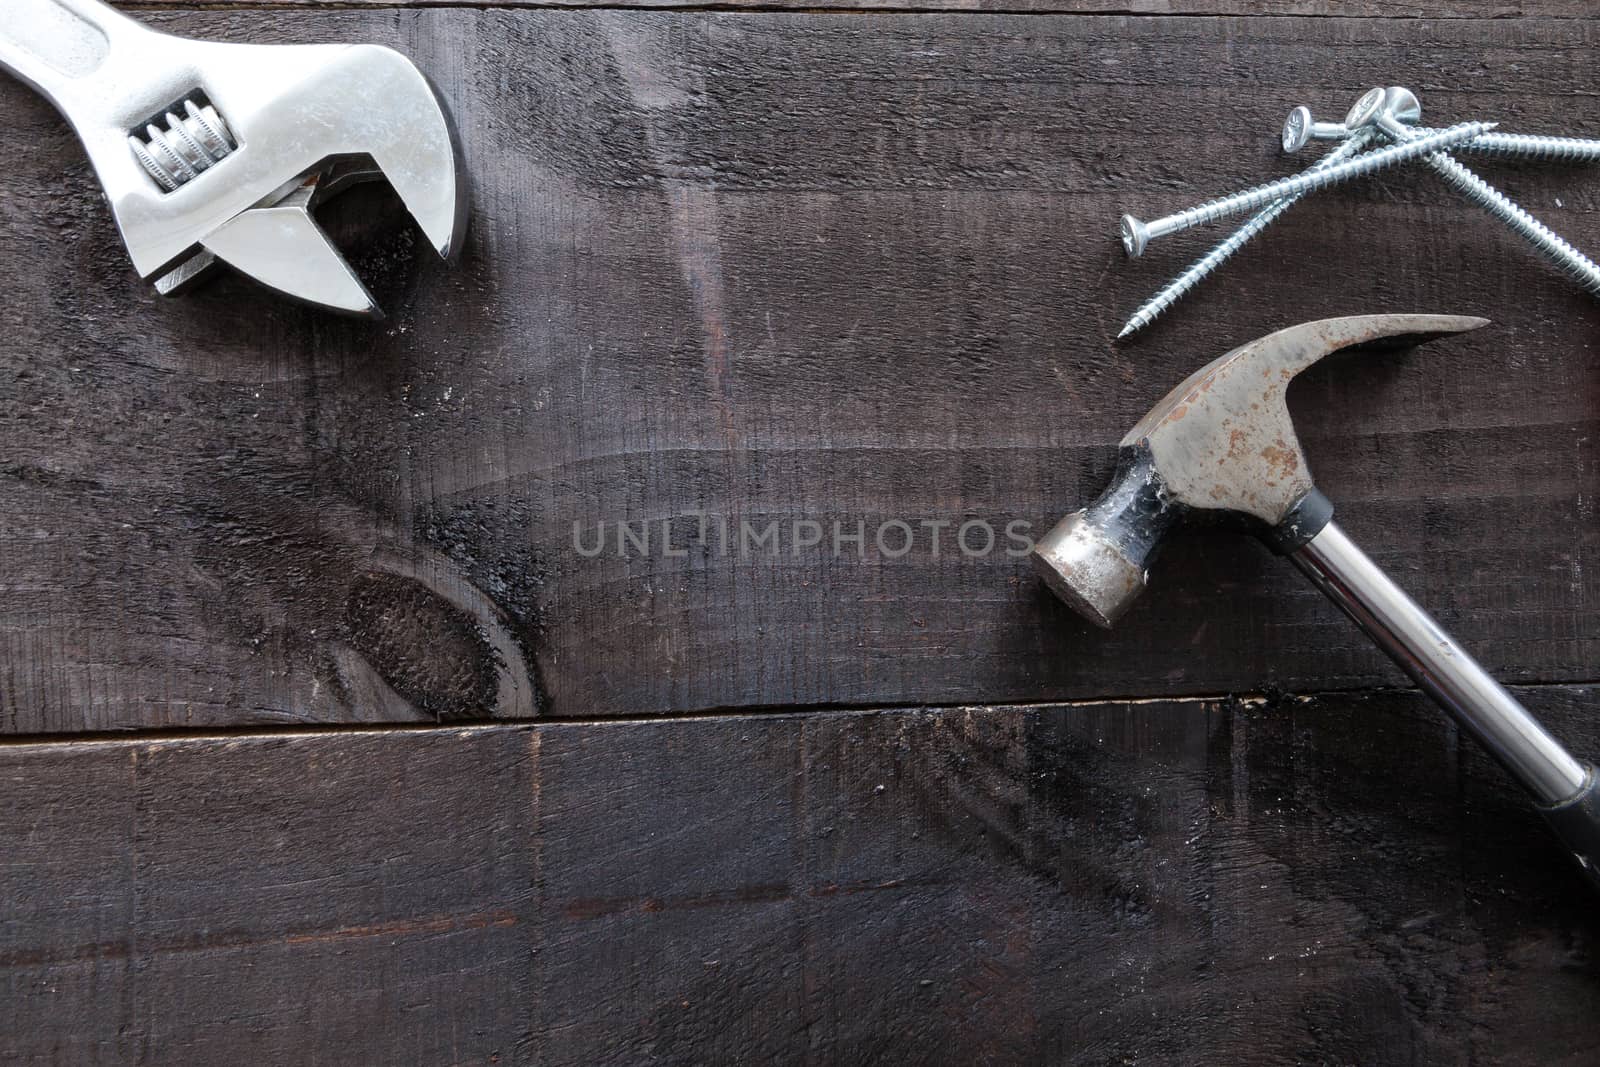 Still life containing several tools in dark wood background